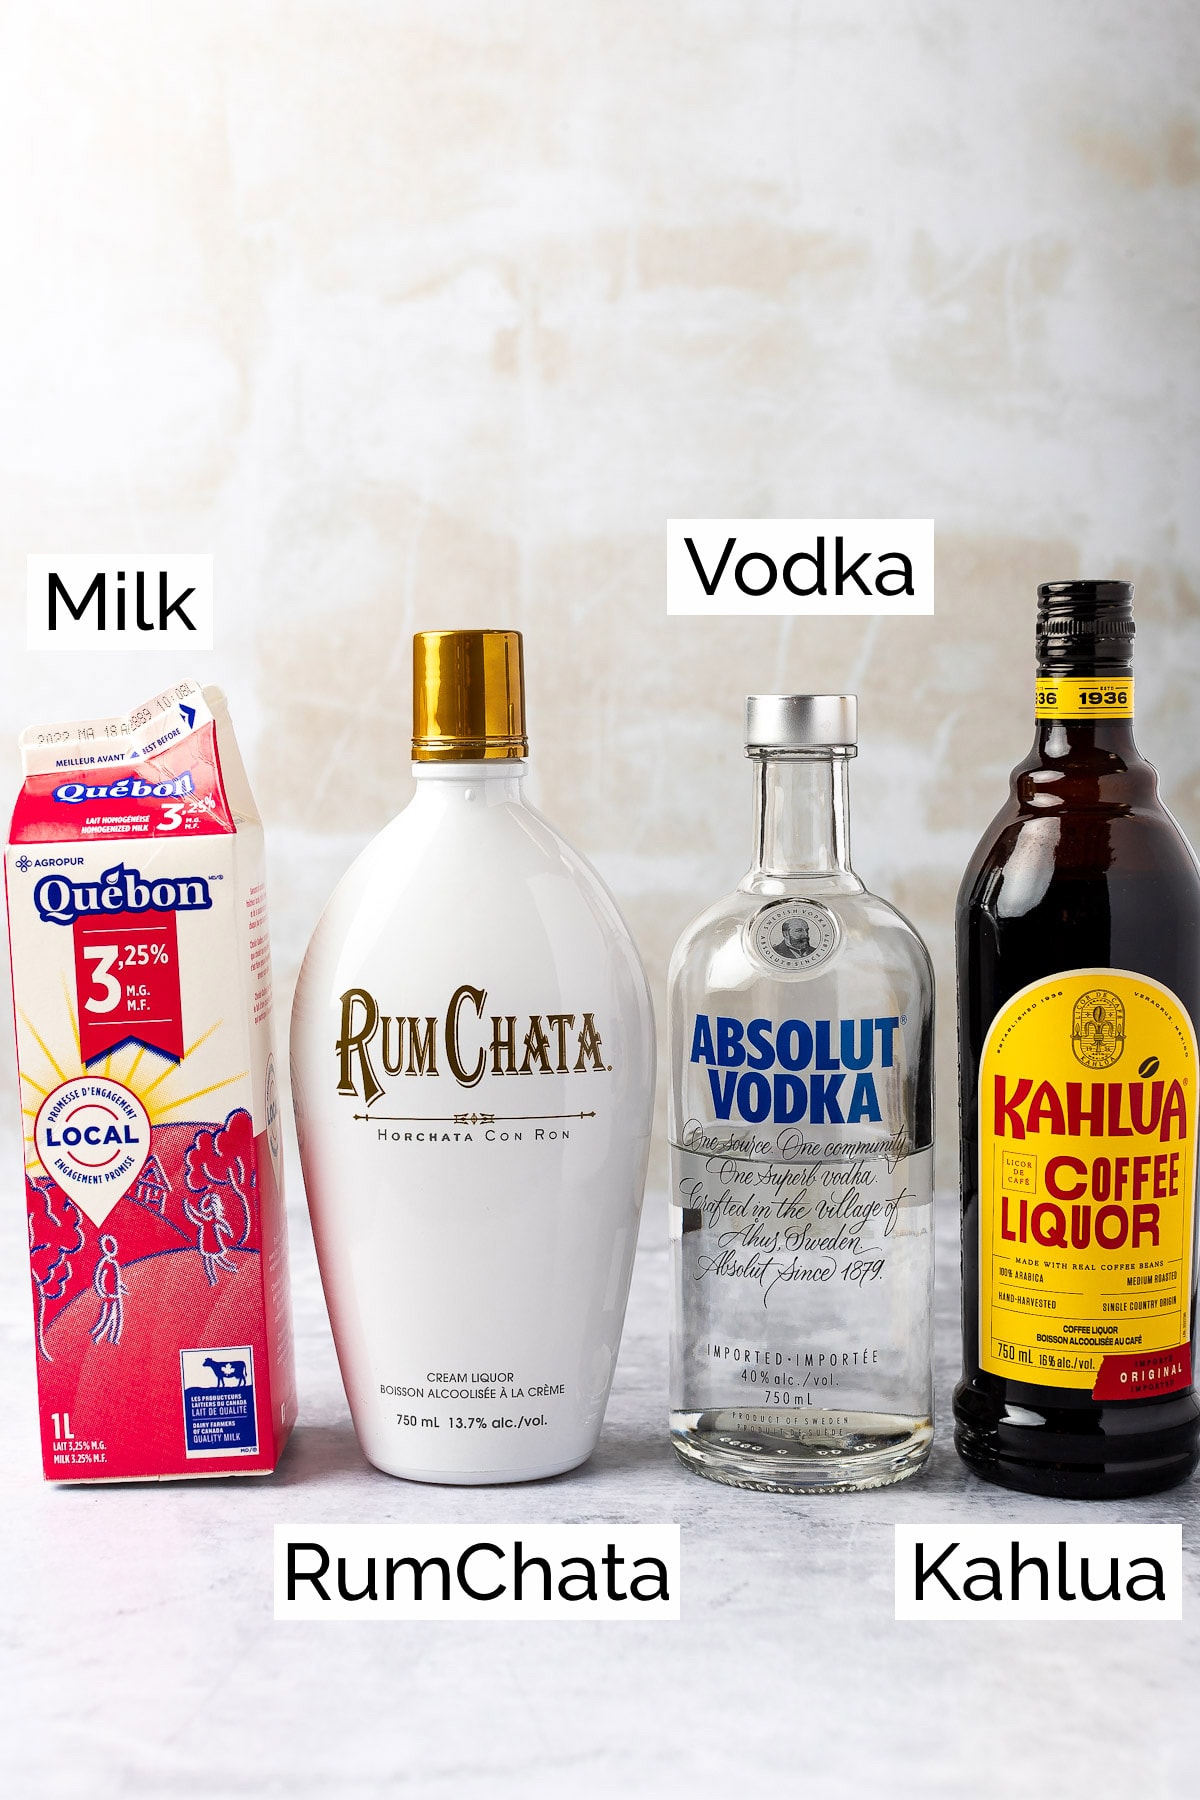 The ingredients needed to make the cocktail.